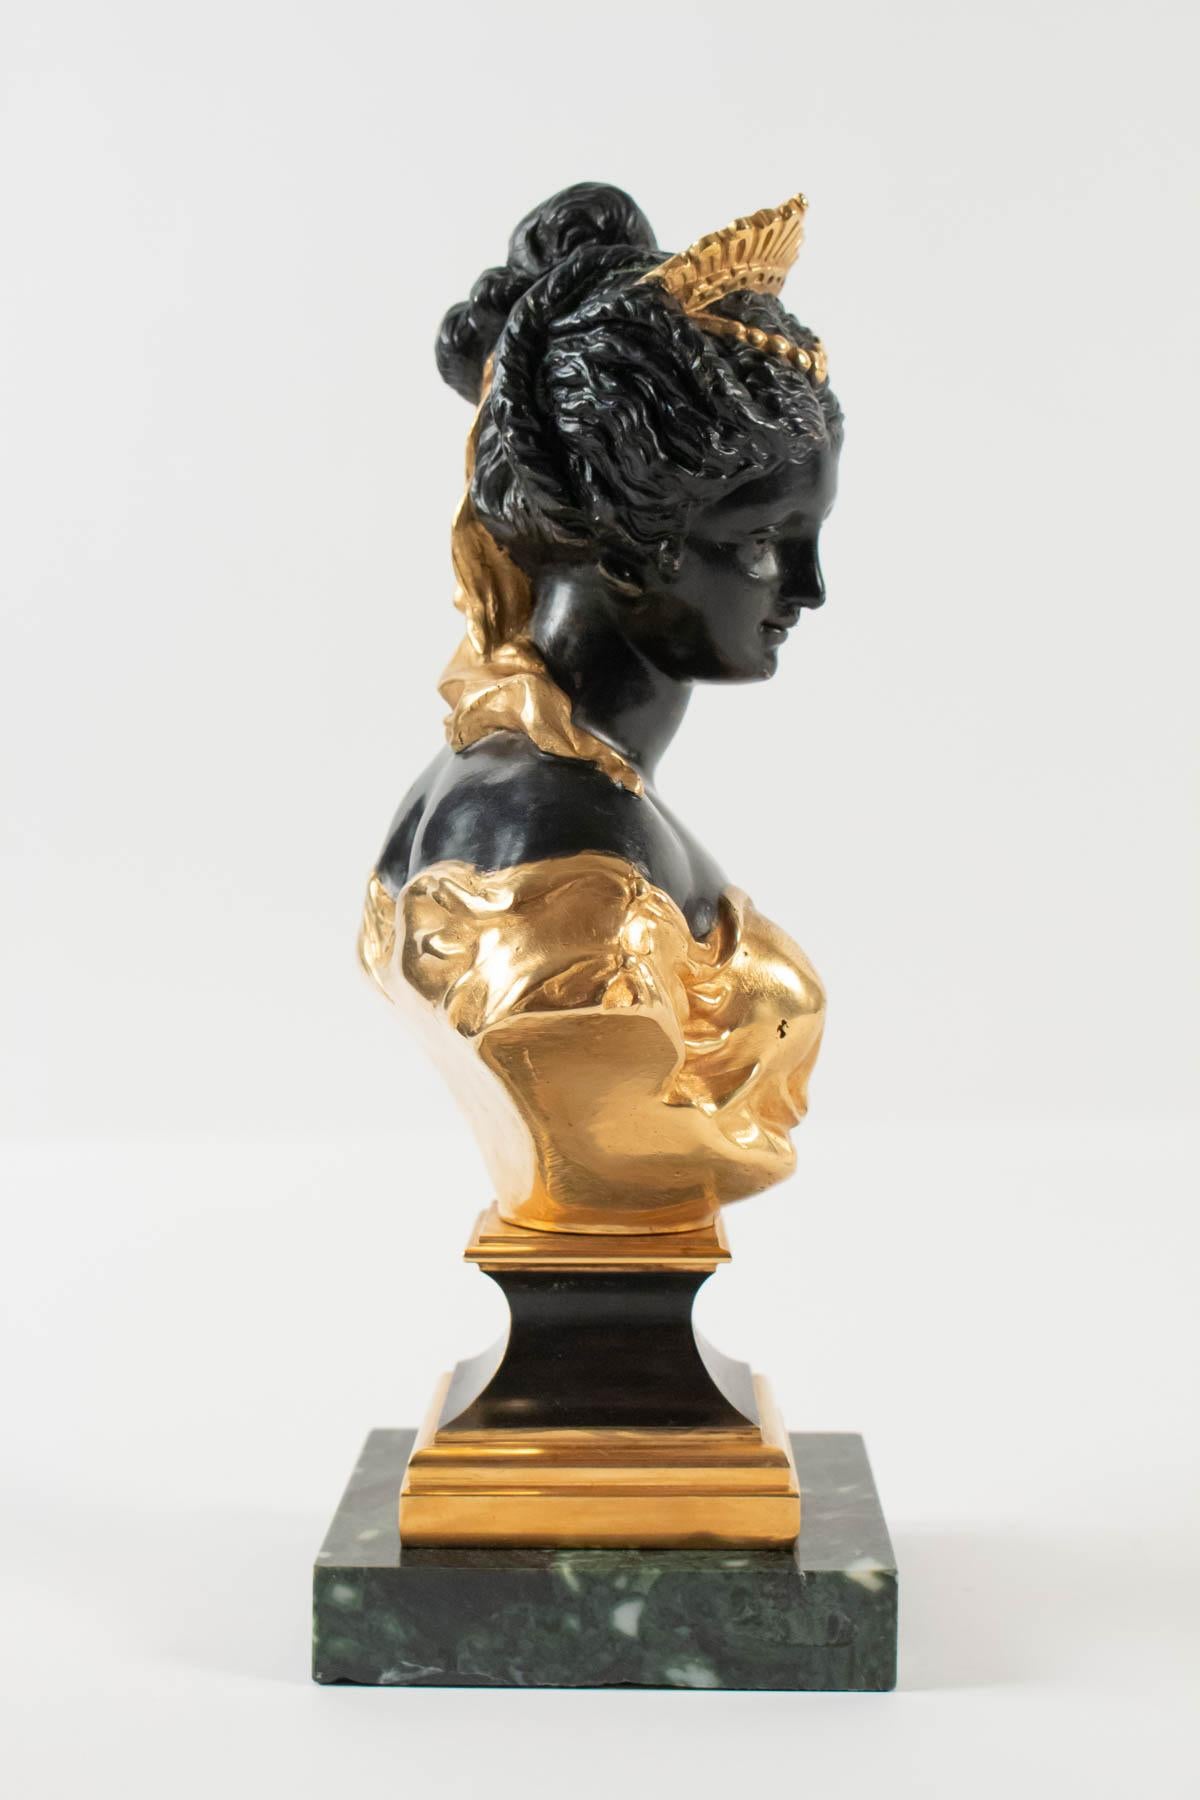 Bronze sculpture double patinas, brown and golden 19th century, Napoleon III period, antiquity, marble base, art object.
Measures: H 28cm, L 13cm, P 13cm.